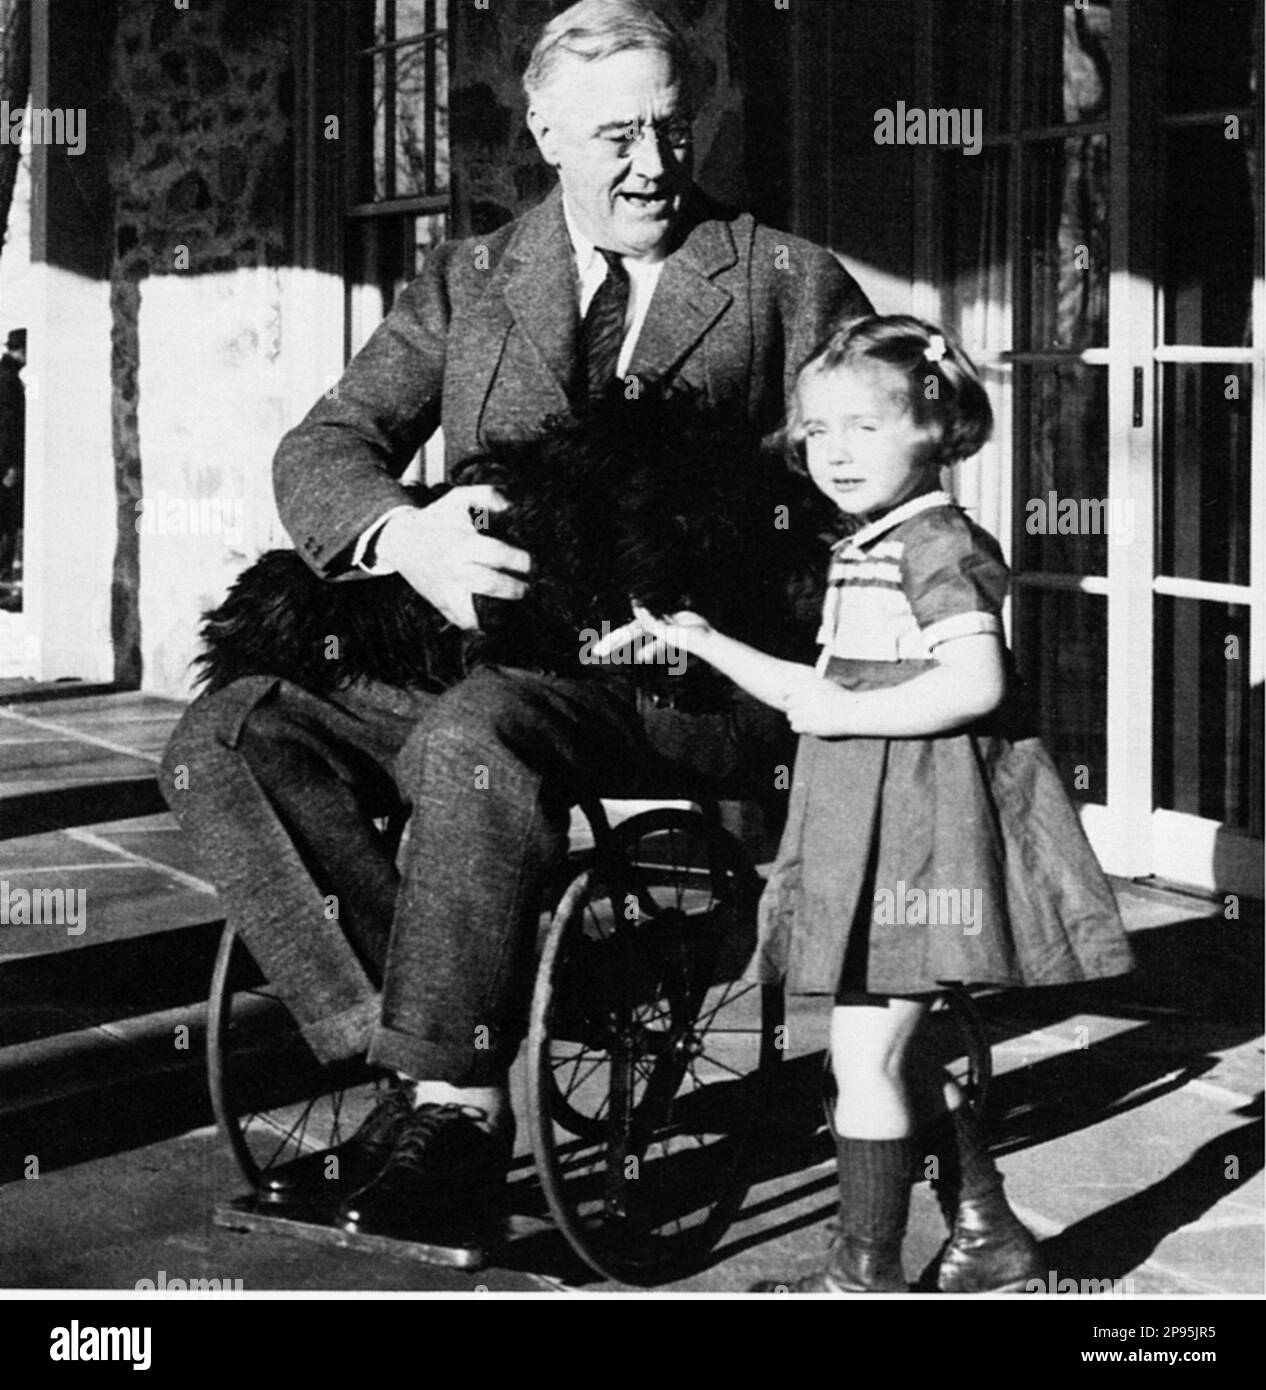 FRANKLIN DELANO ROOSEVELT ( 1882 – 1945 ), often referred to by his initials FDR, was the 32nd President of the United States. was the 22nd and 24th President of the United States, from March 4, 1933  to April 12, 1945 .  In this photo in wheelchair with a nefew . - Presidente della Repubblica - USA - ritratto - portrait - cravatta - tie - collar - colletto  - sedia a rotelle - UNITED STATES  - STATI UNITI   ----  Archivio GBB Stock Photo